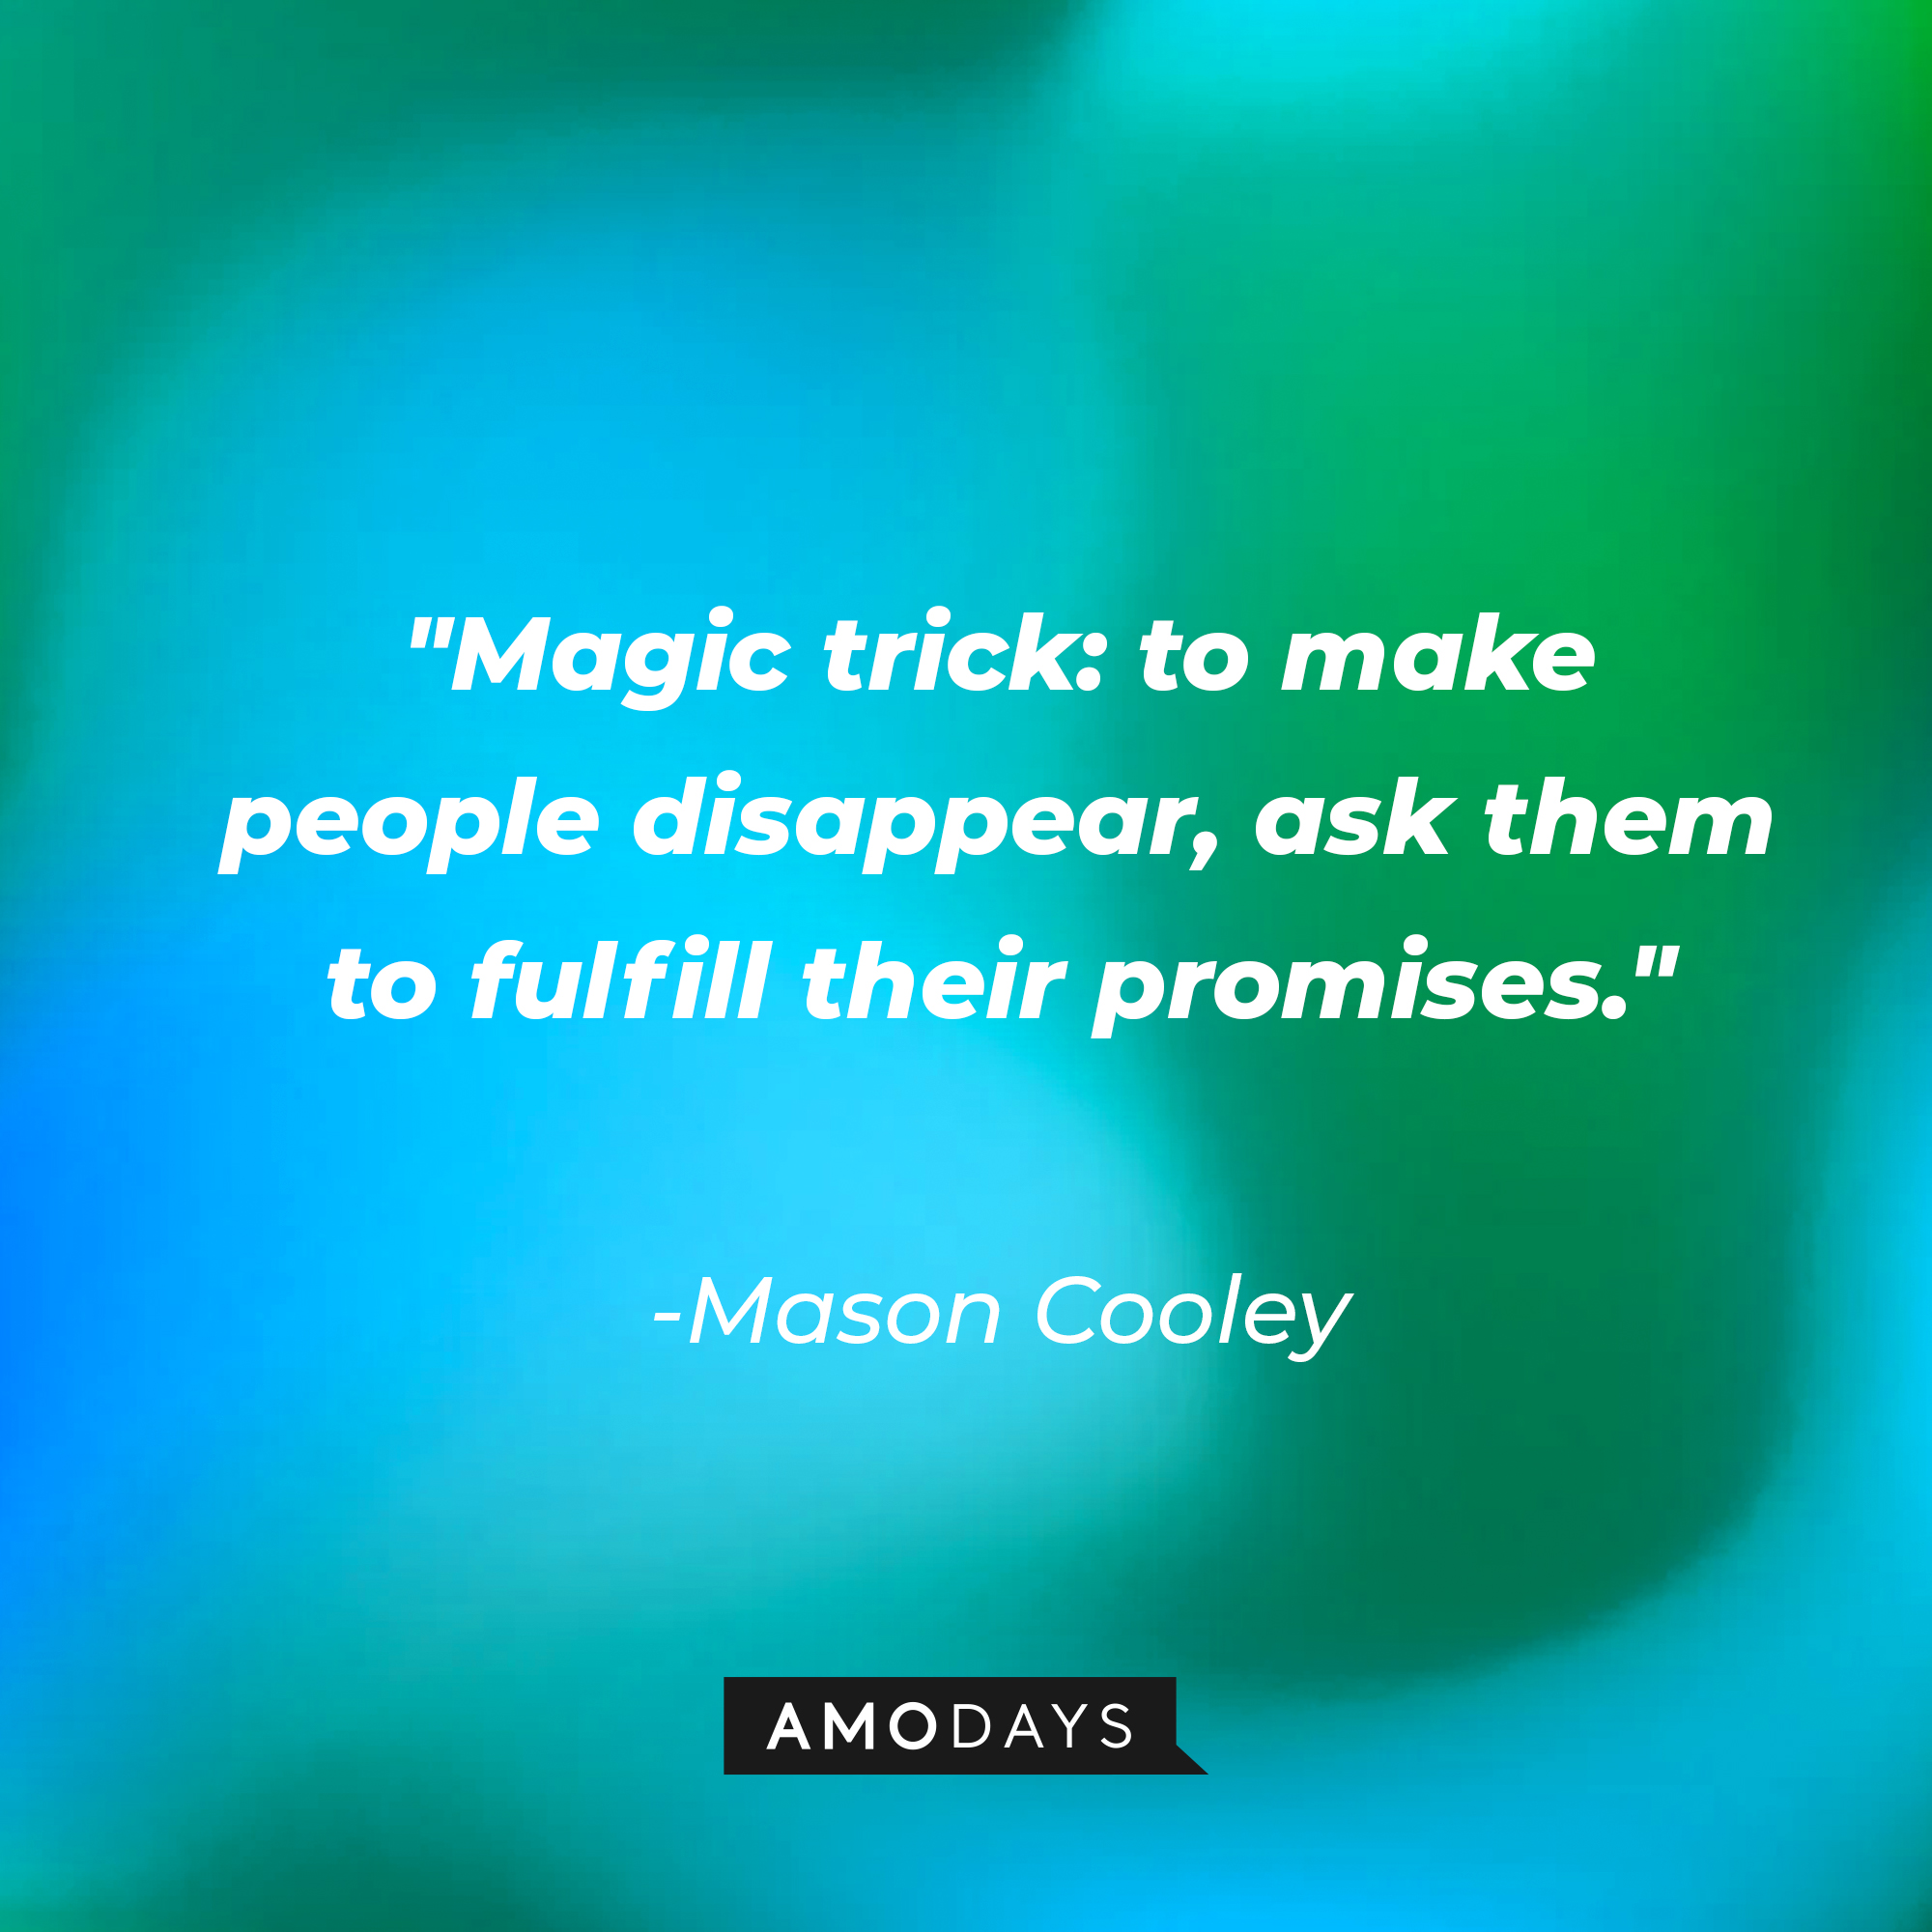 Mason Cooley's quote: "Magic trick: to make people disappear, ask them to fulfill their promises." | Image: AmoDays